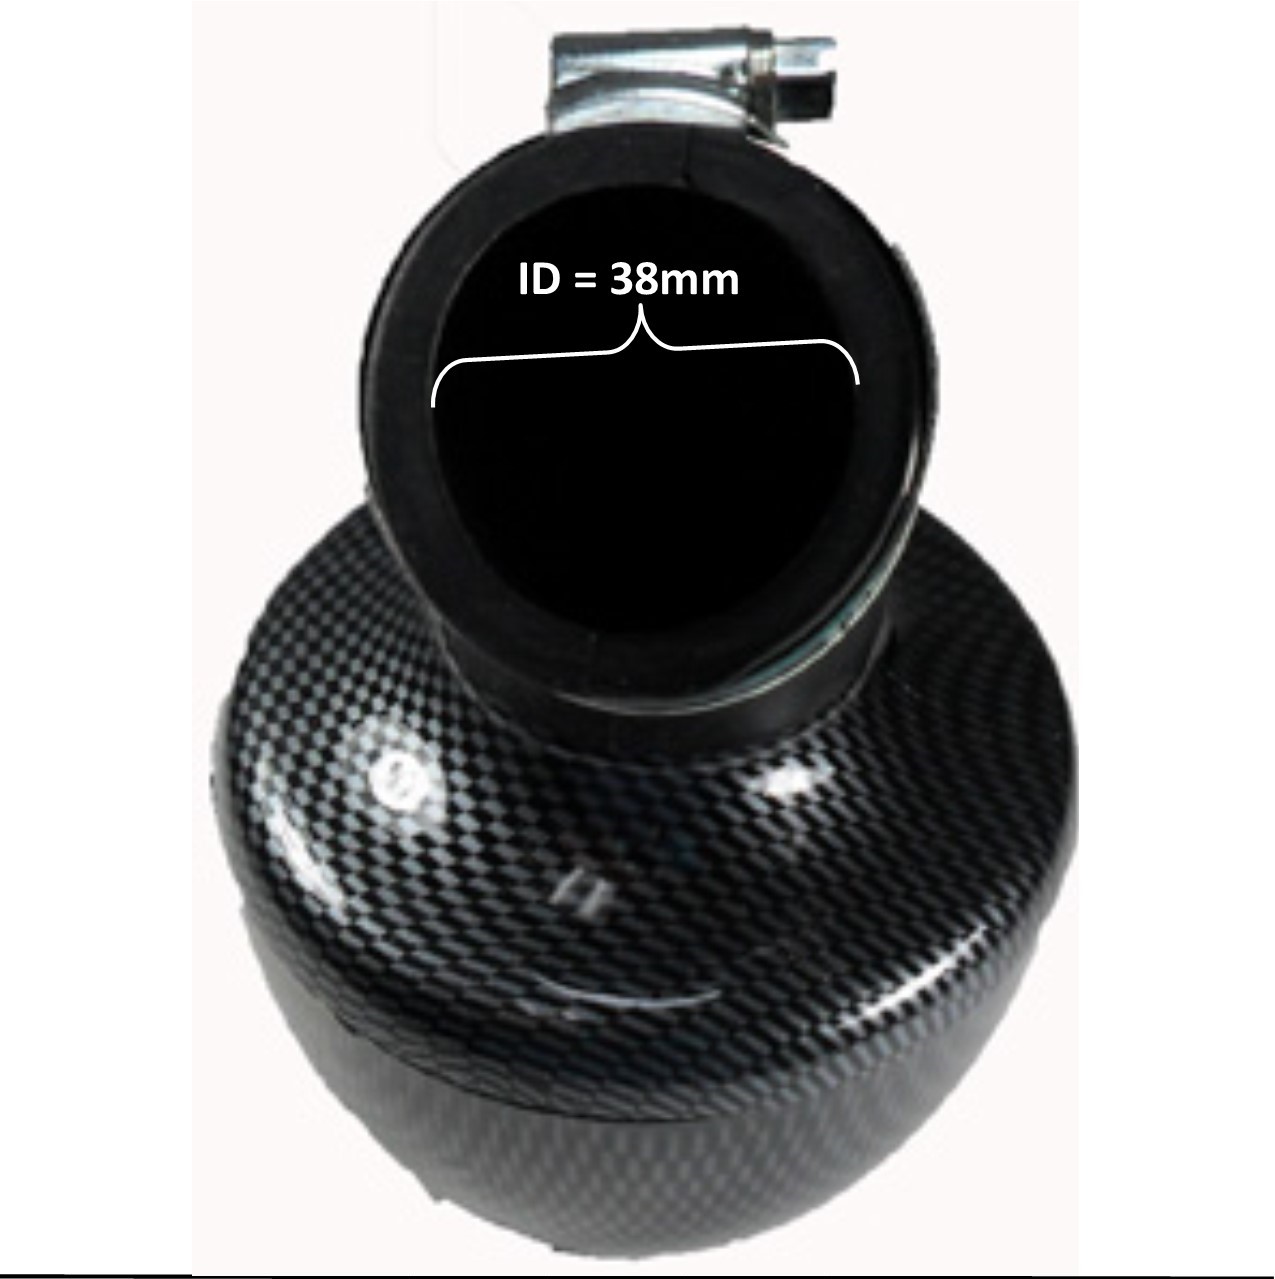 High Performance Carbon Graphite Air Filter ID=38mm Fits 49cc Scooters with PD18J Carburetors